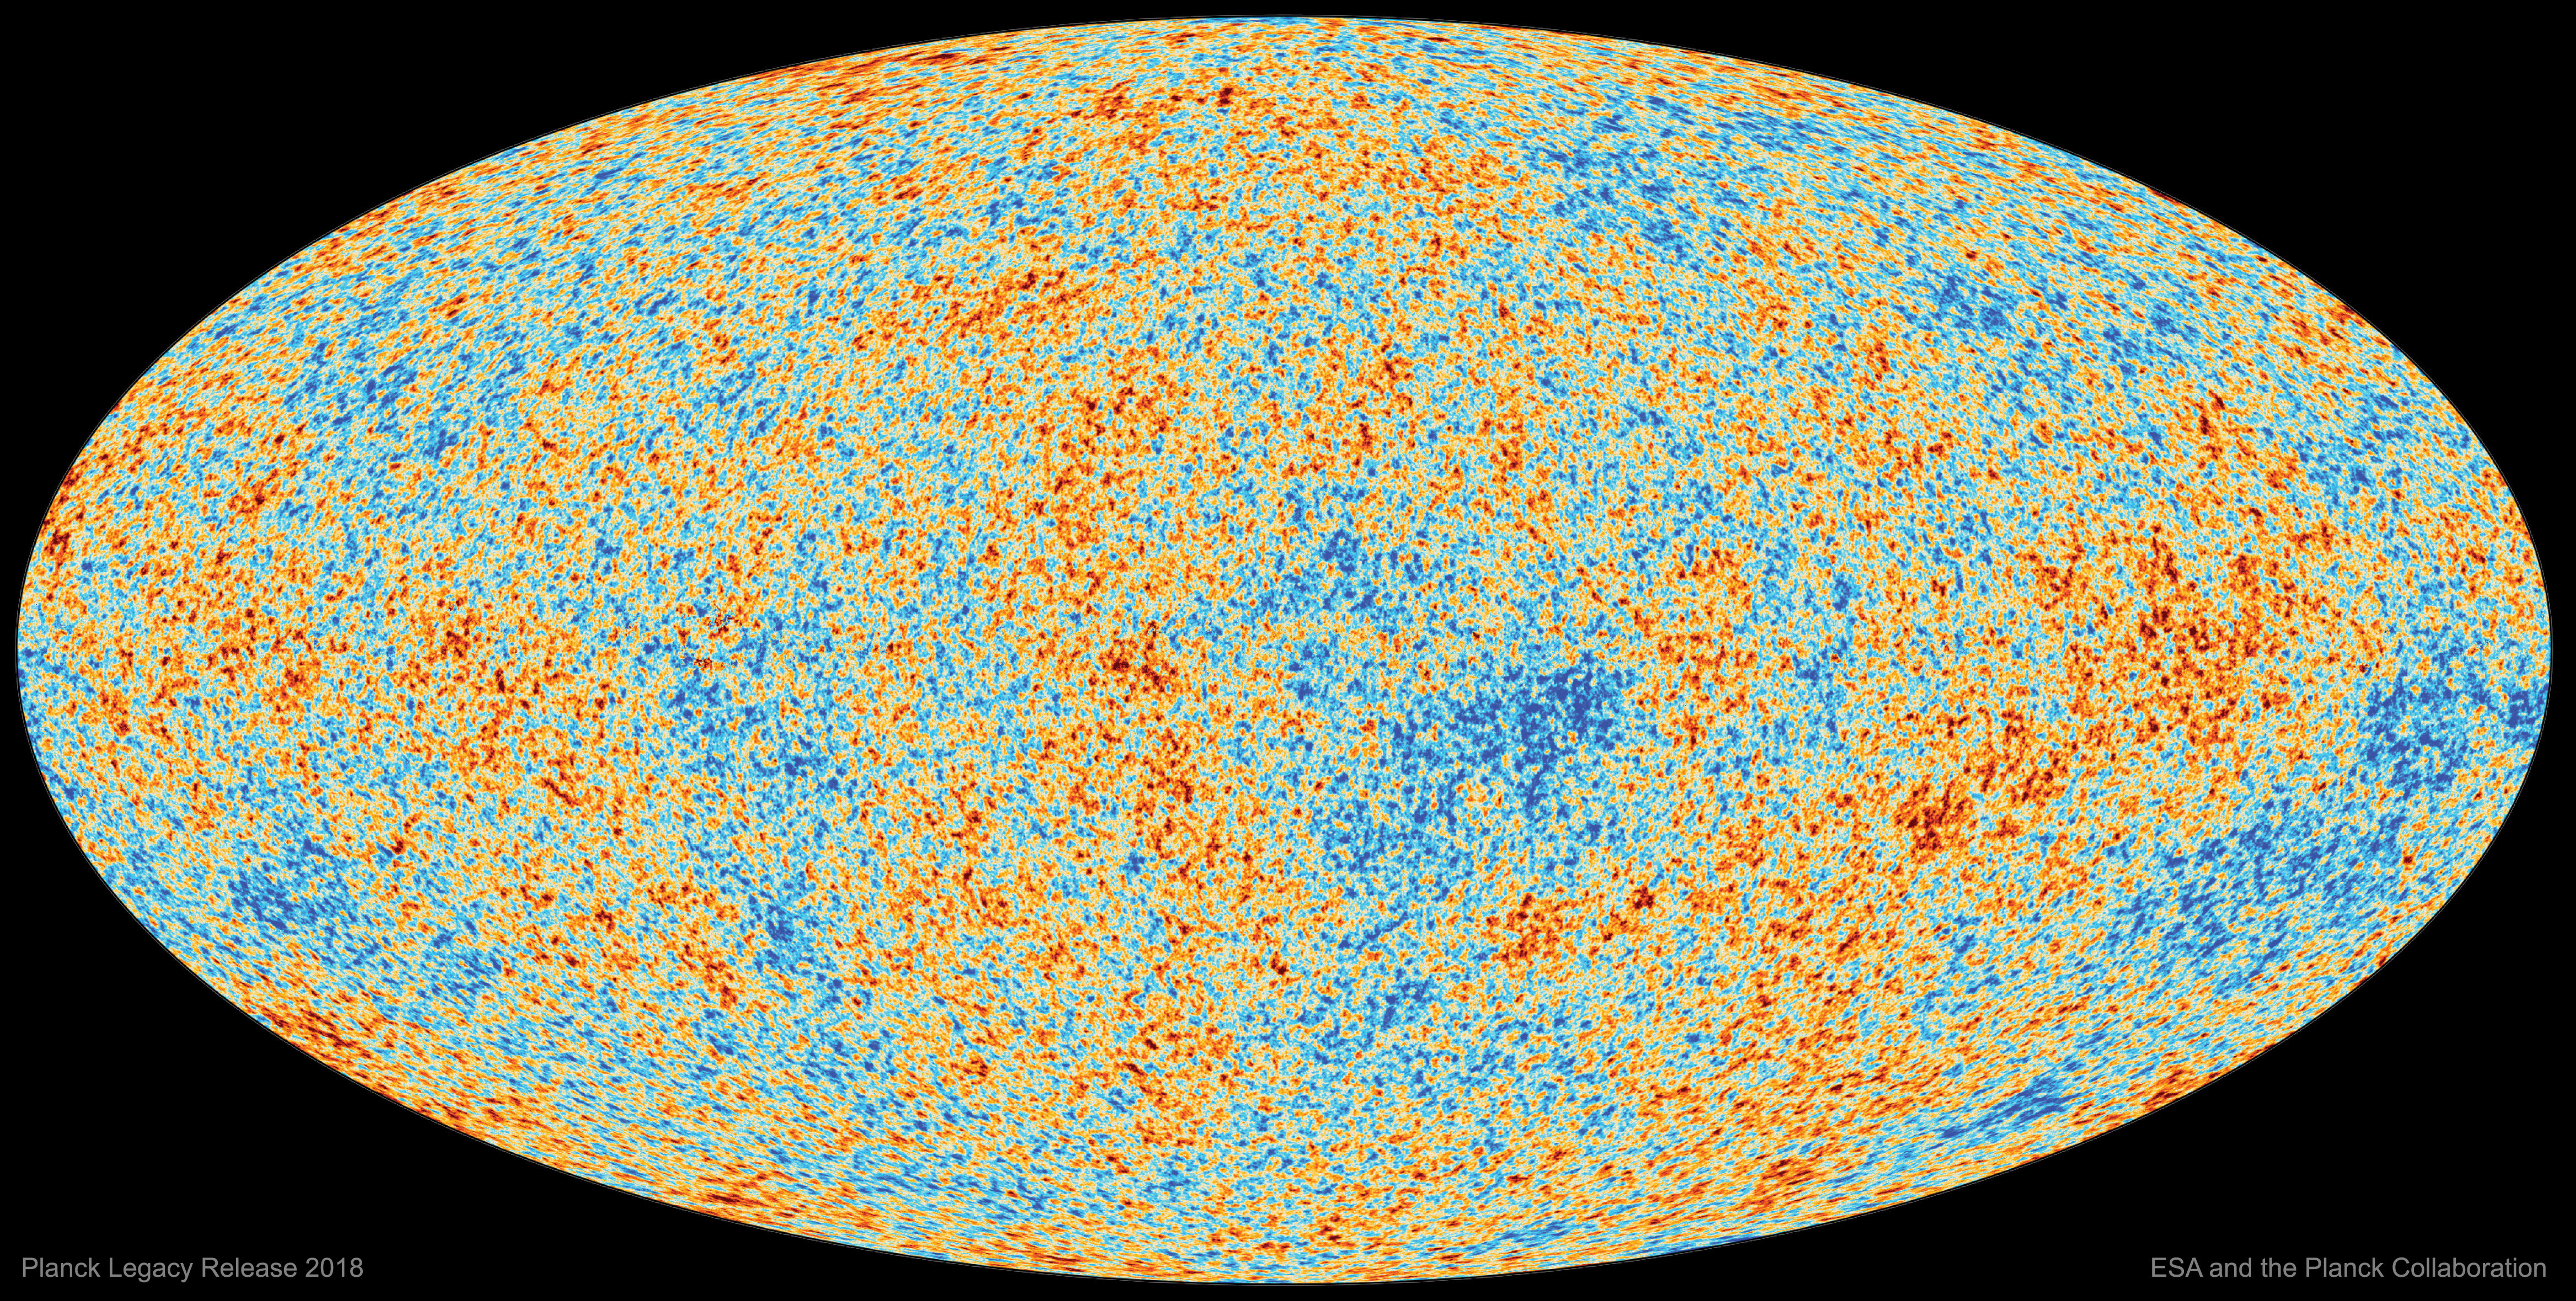 The Cosmic Microwave Background observed by *Planck*. Credit: *Planck* Legacy Release 2018, ESA and the *Planck* collaboration.